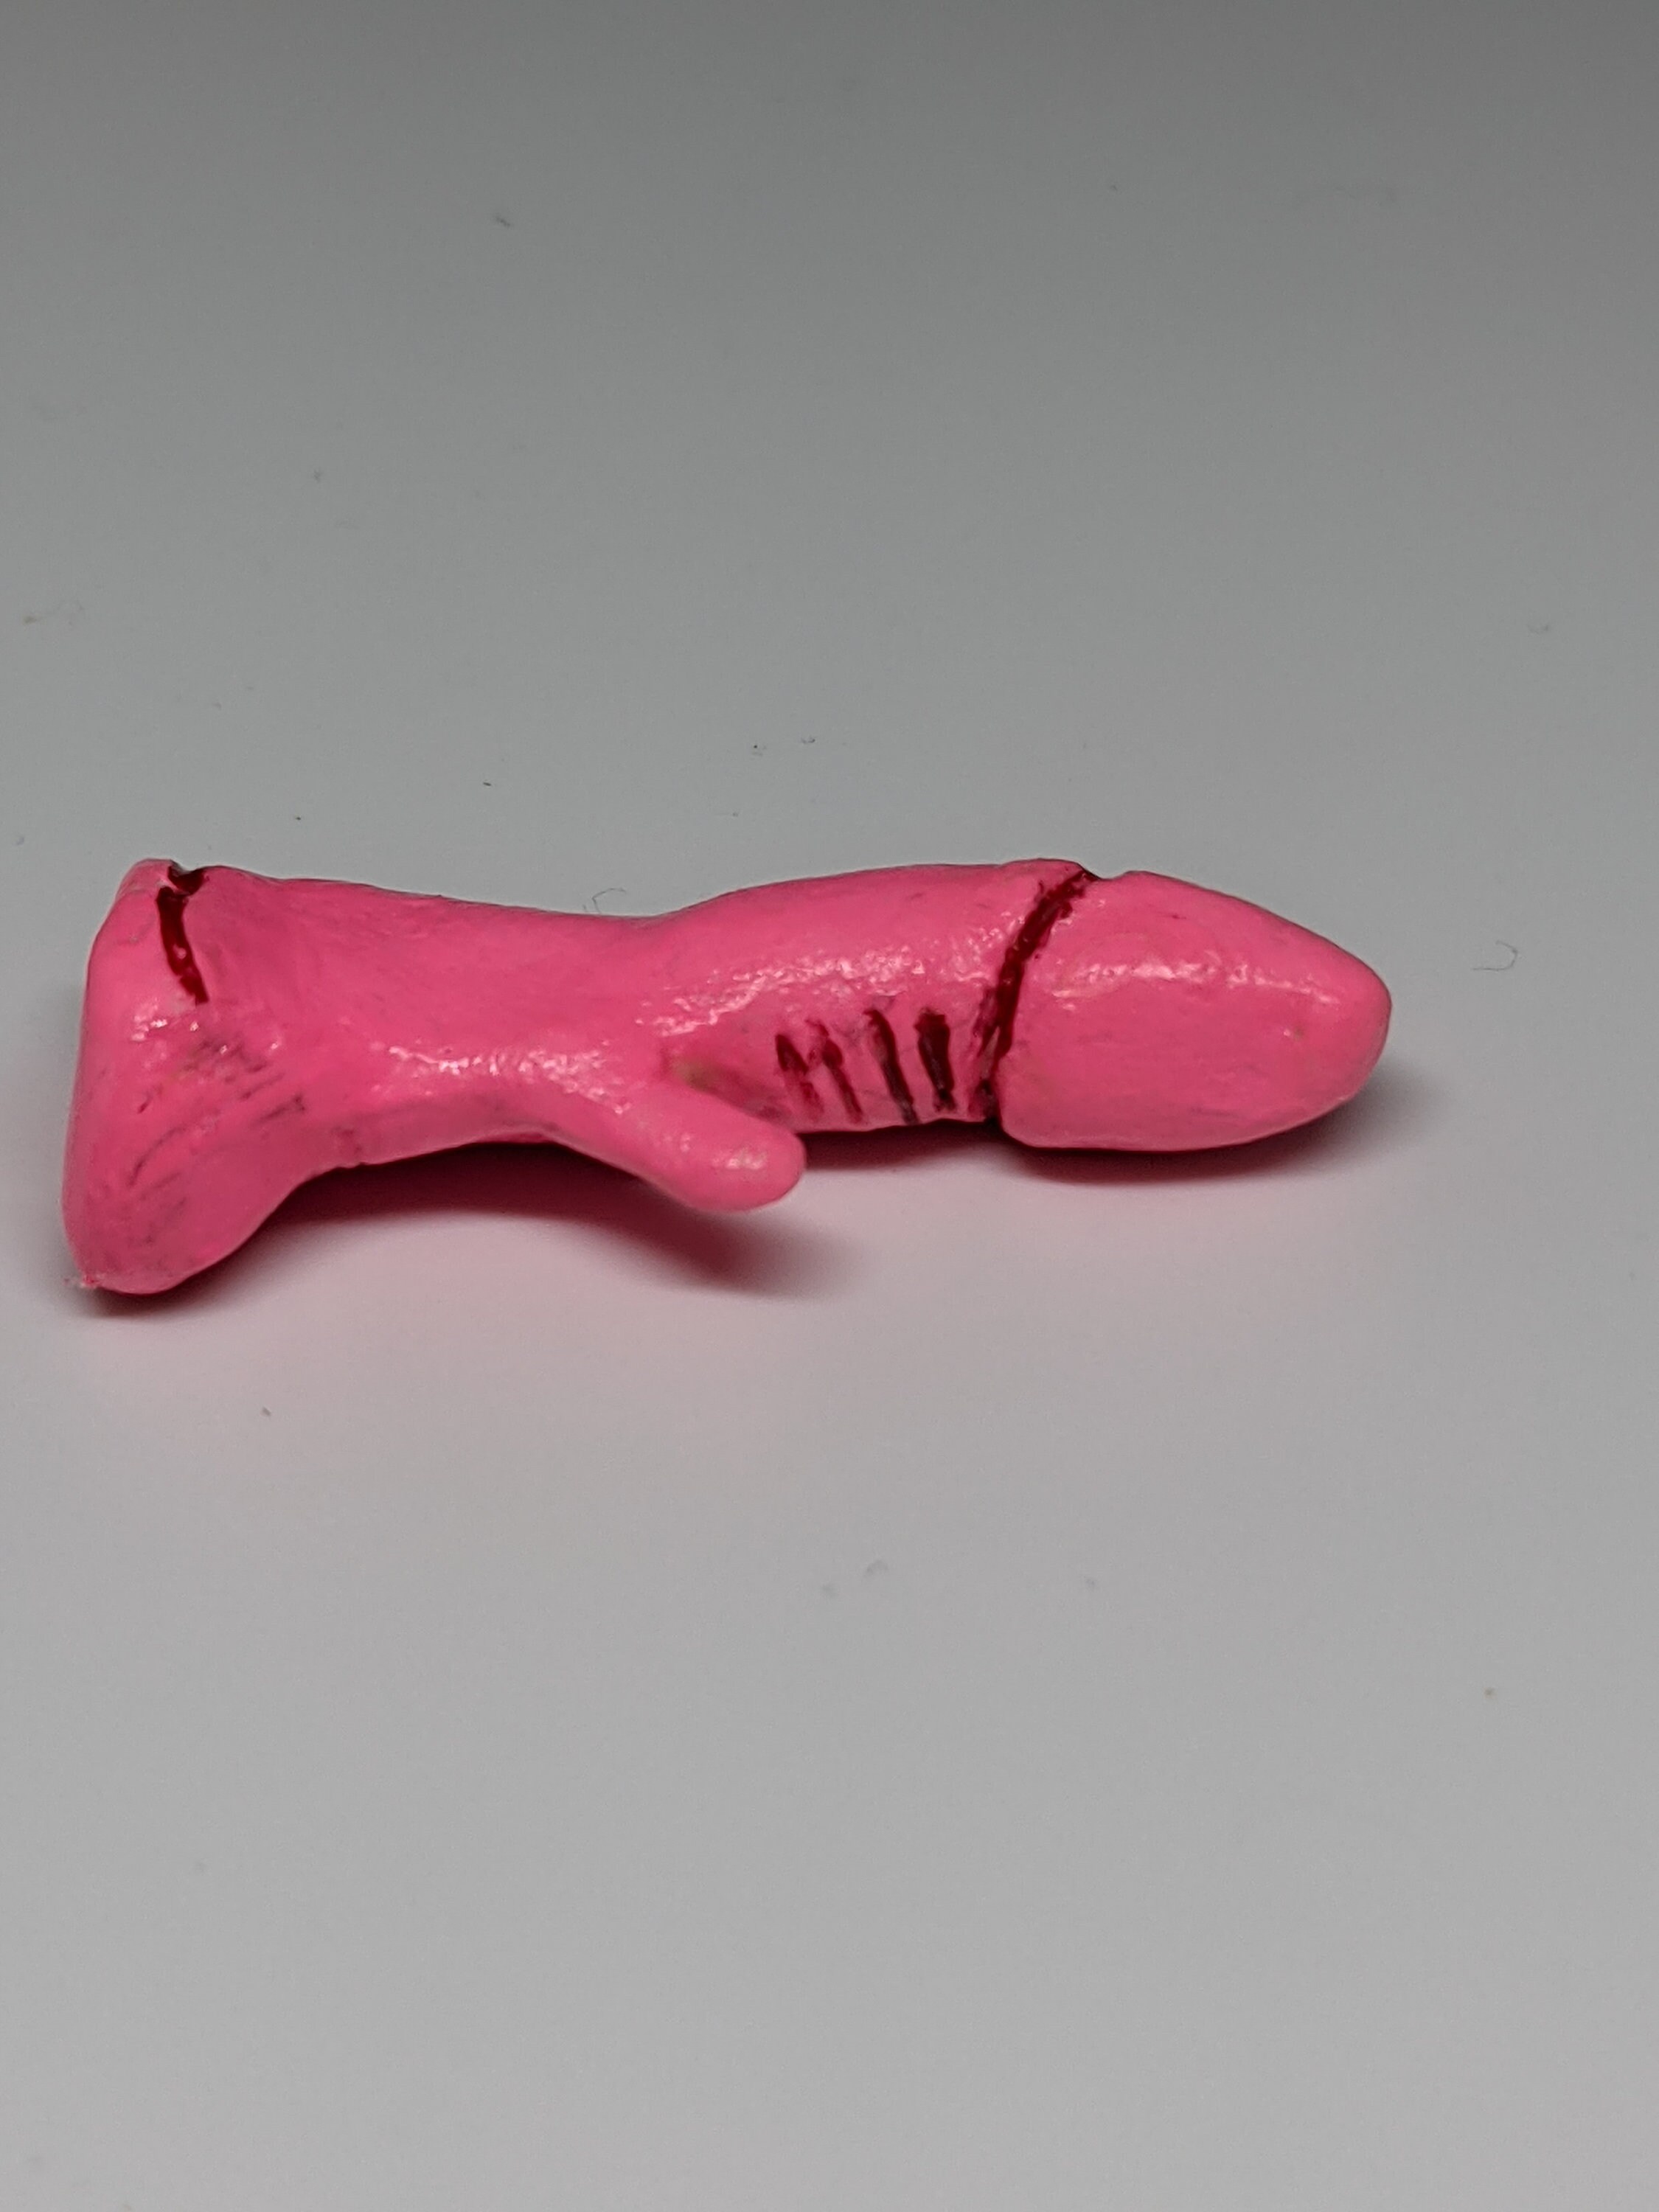 Funny Handmade Hand-painted Sex Toy Miniature Vibrator Polymer